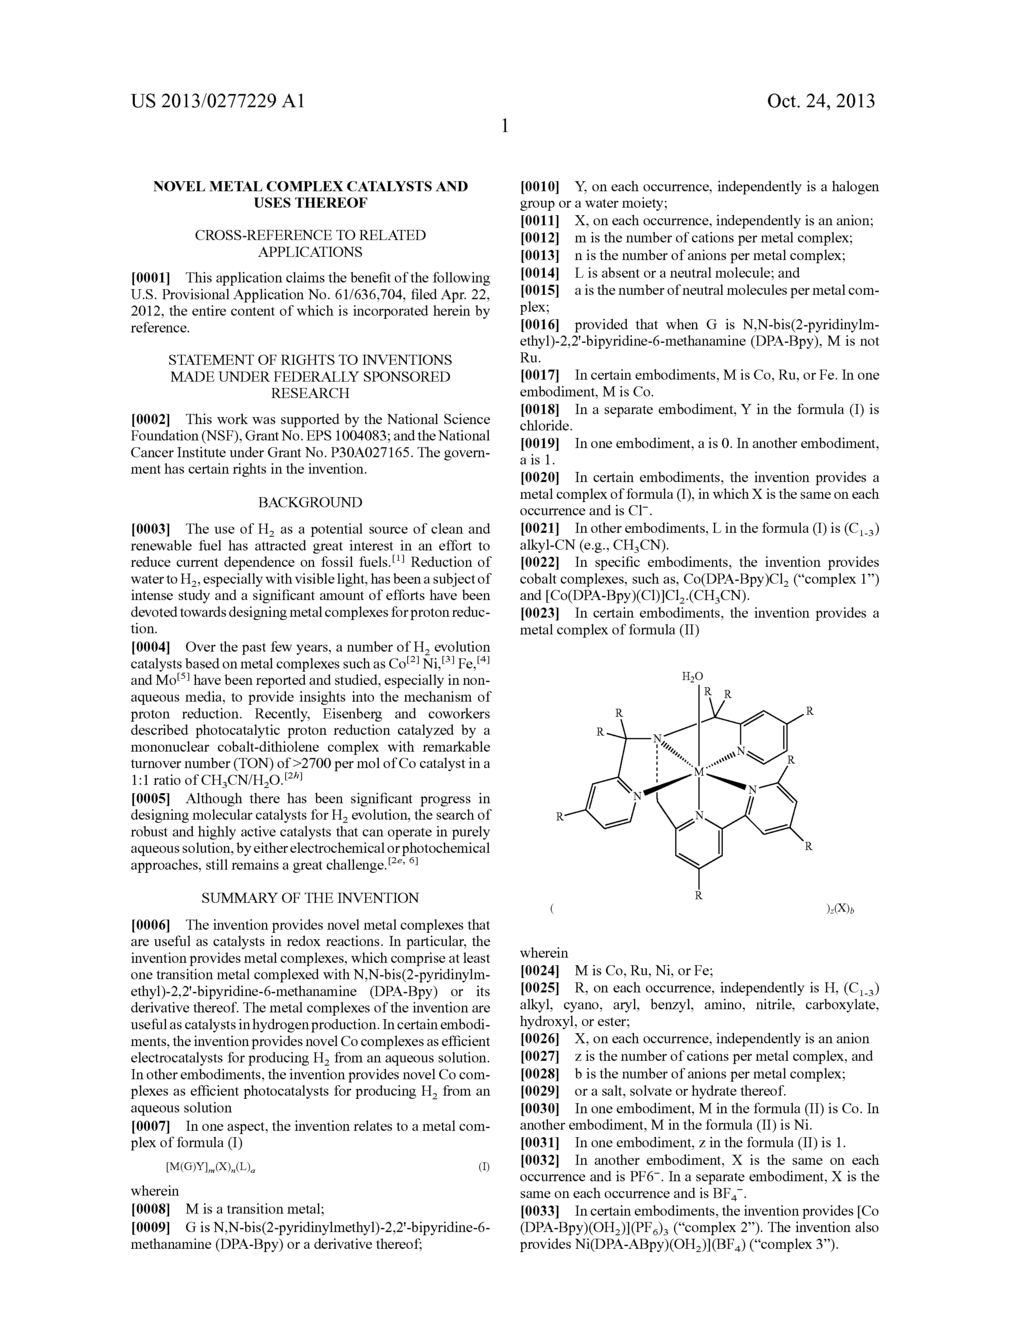 NOVEL METAL COMPLEX CATALYSTS AND USES THEREOF - diagram, schematic, and image 20